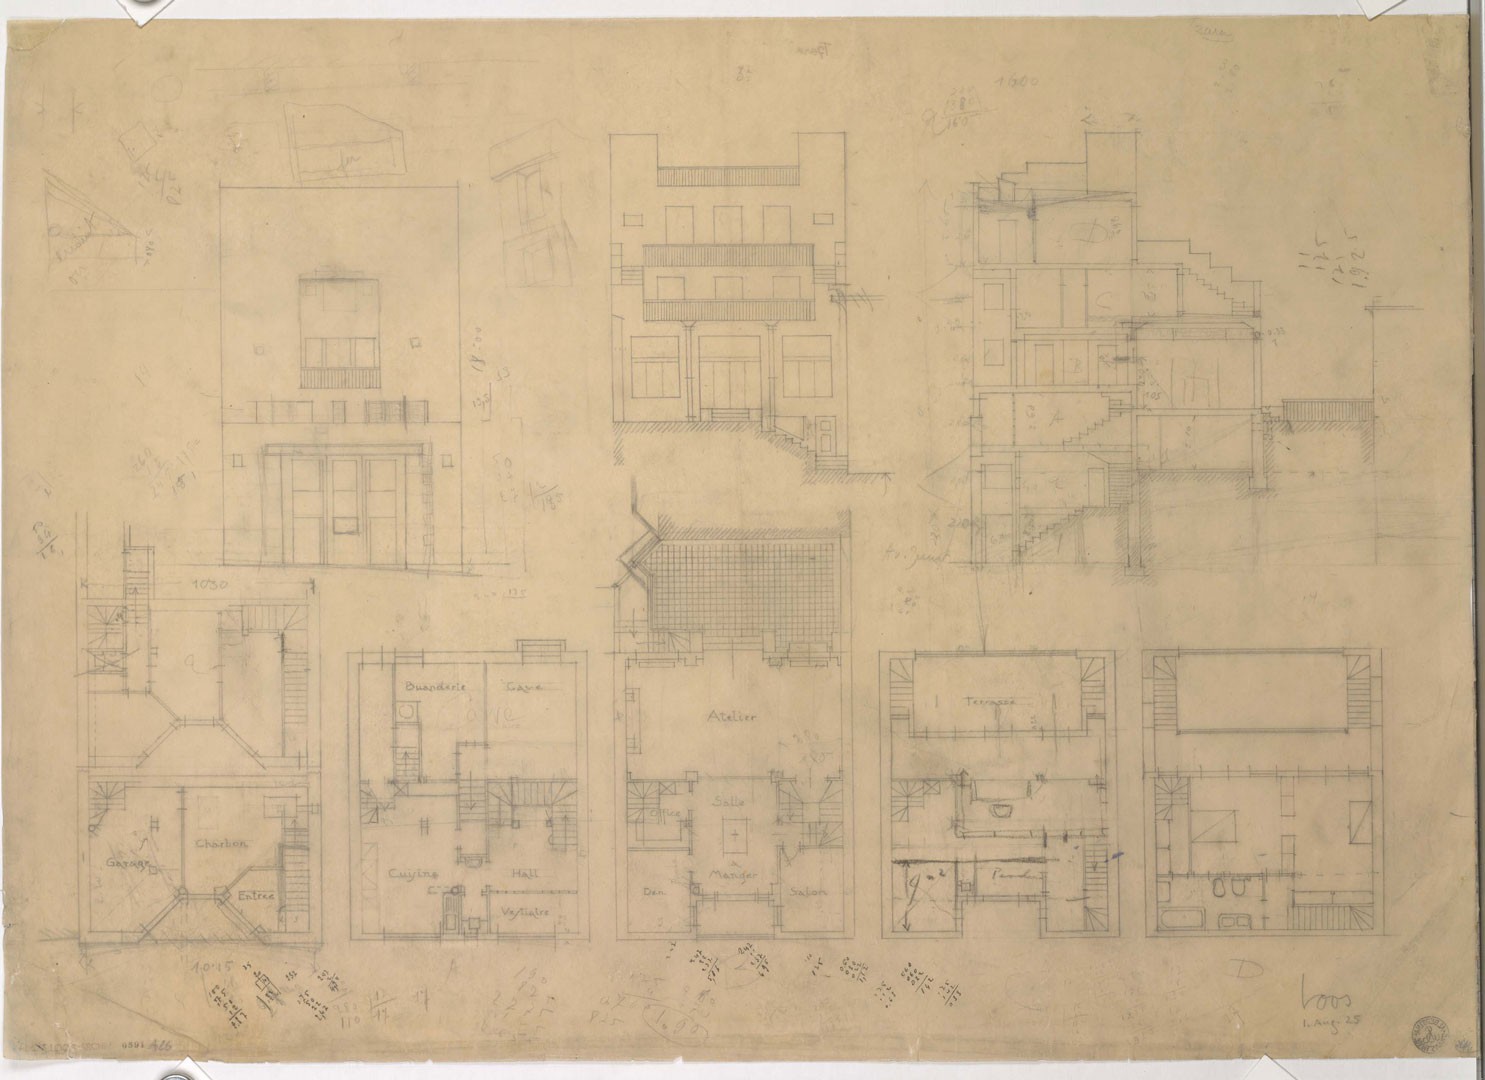 <BODY><div>Adolf Loos, House for Tristan Tzara, Paris XVIII, Avenue Junot 15, France, floor plan submitted for review, 1st version, planned in 1925, built in 1926 </div><div>Tracing paper, pencil </div><div>© ALBERTINA, Vienna</div><div> </div></BODY>